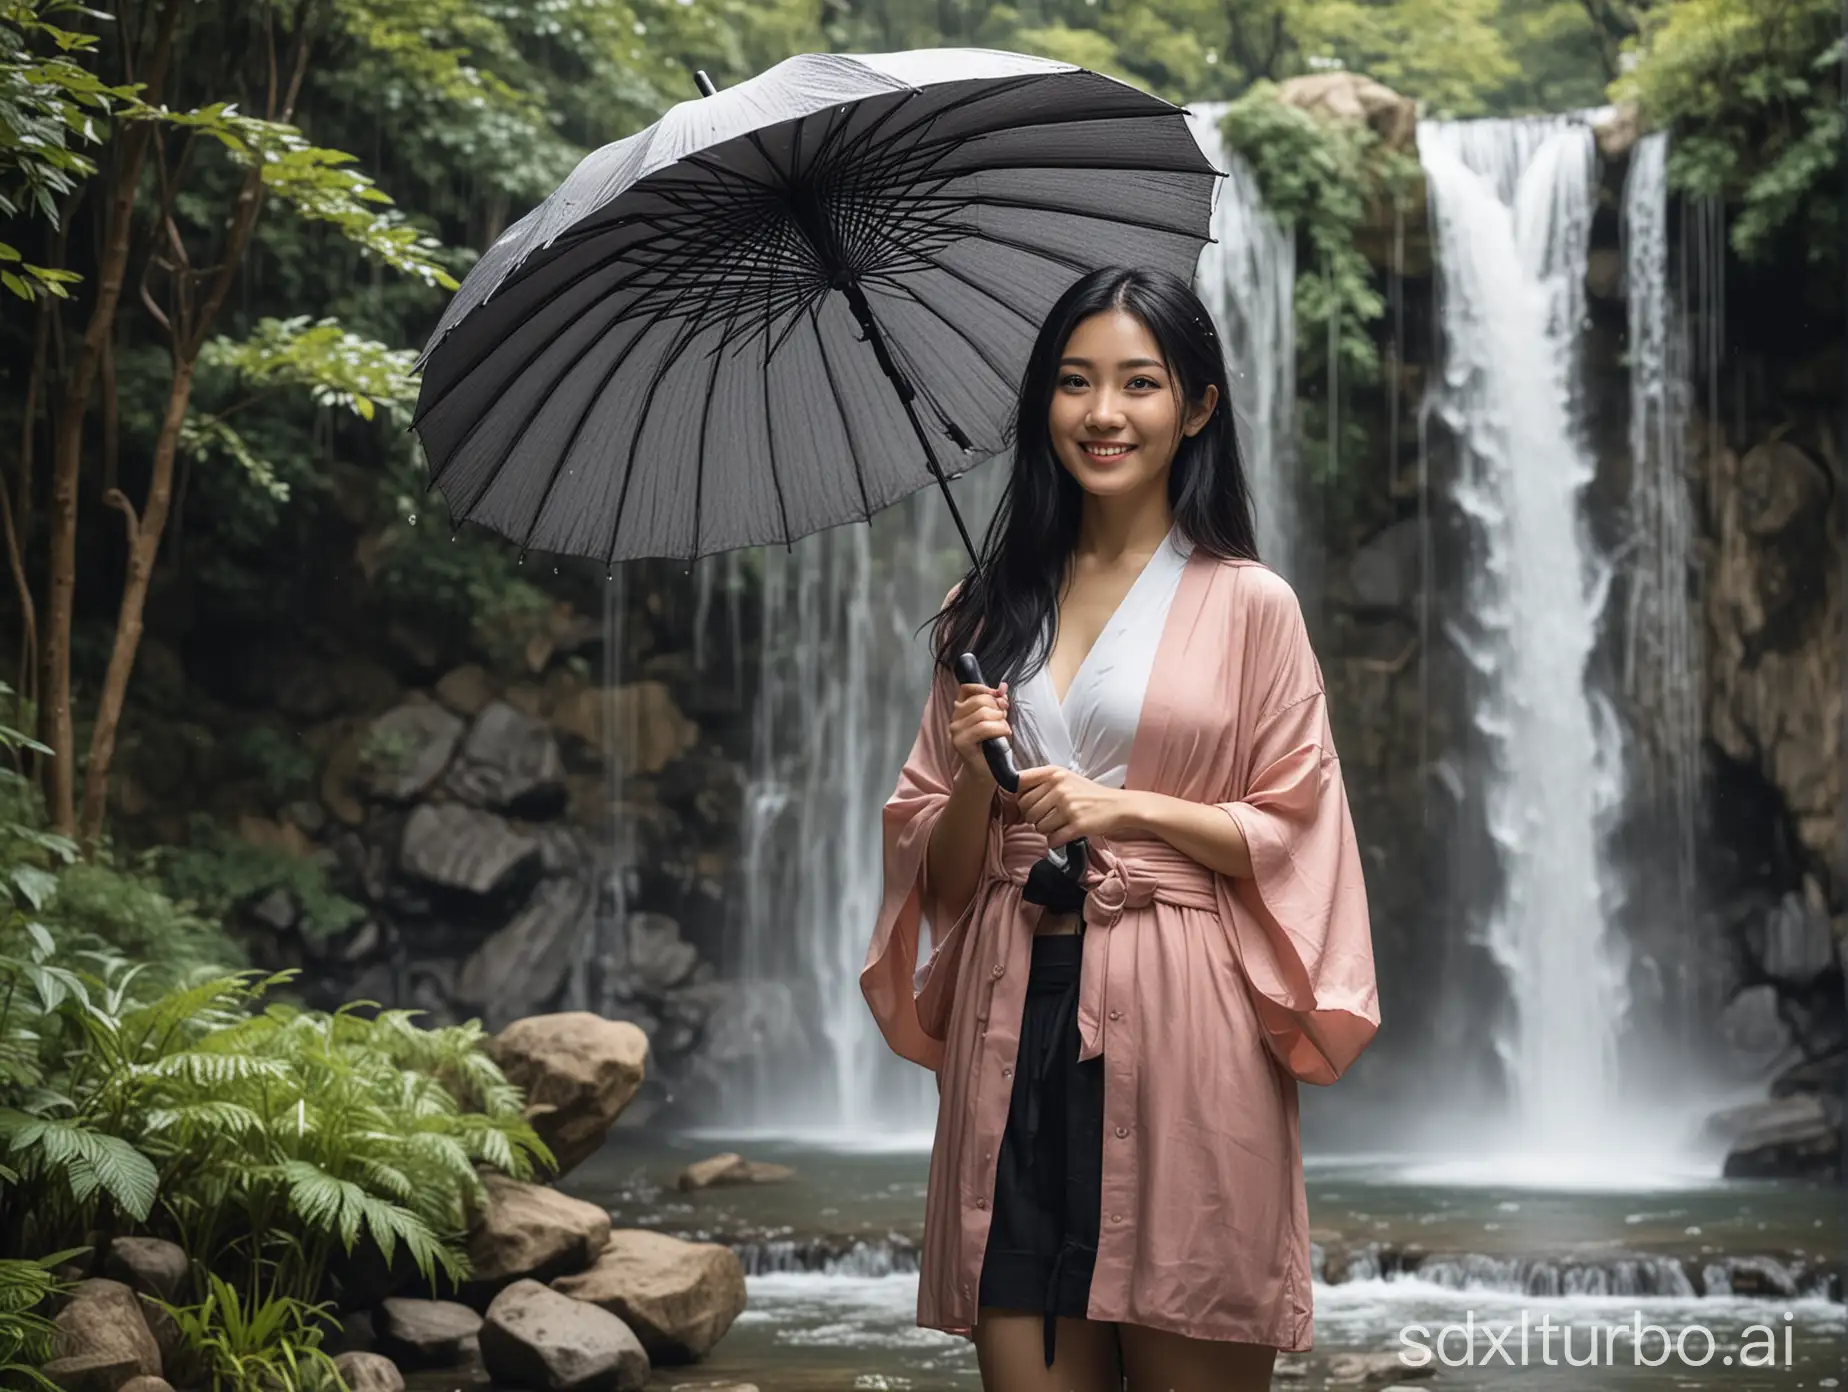 beautiful intellectual typical Japanese 33-year-old girl stands in front of a waterfall with an umbrella, smiling, Instagram model, long black hair, warm, black eyes, height 6.5 feet, female, masterpiece, 4k, correct fingers or hands